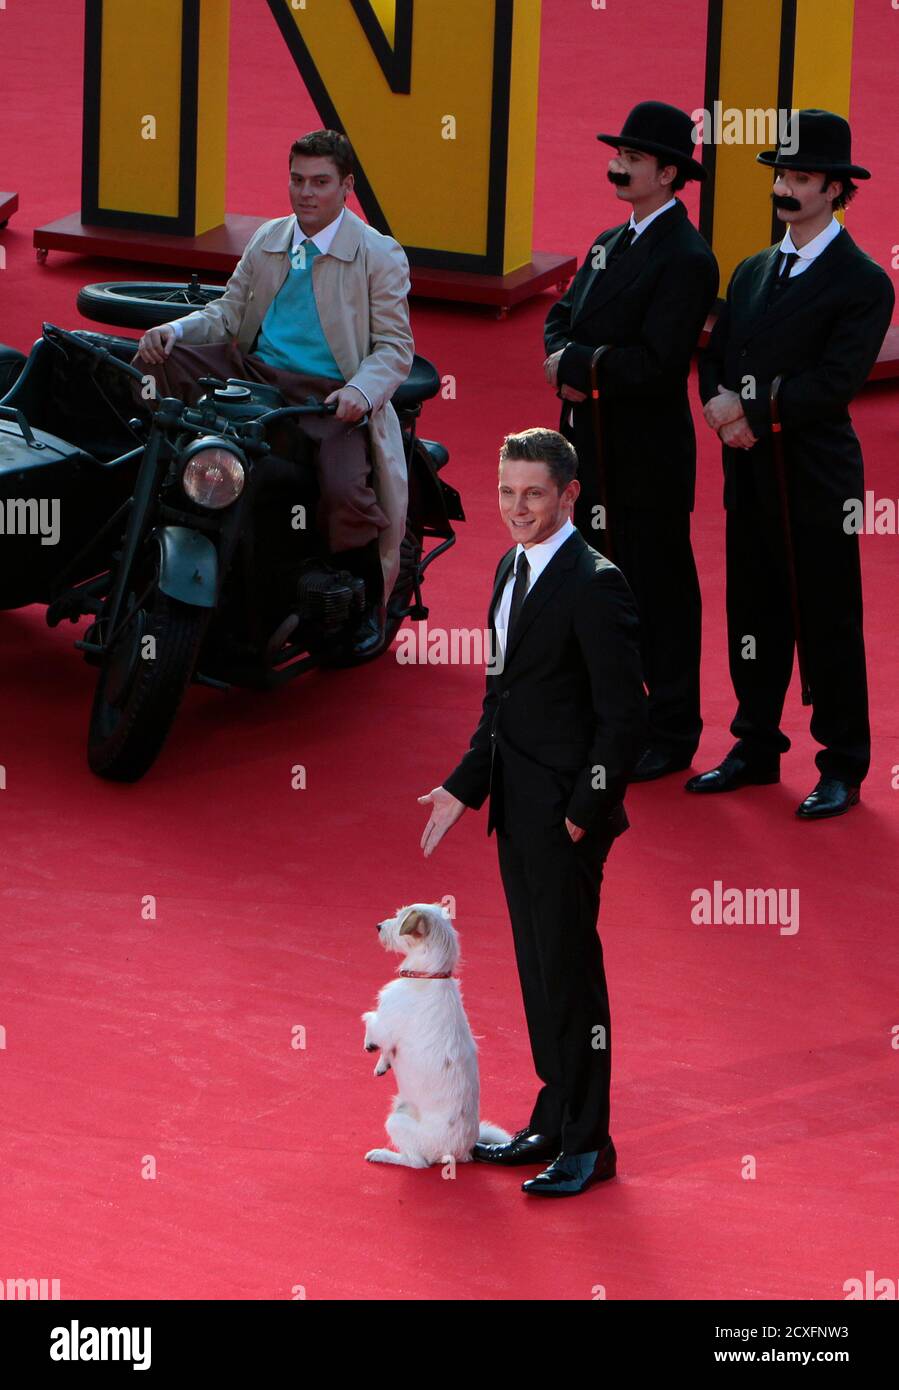 Actor Jamie Bell (C, bottom) gestures as he poses with 'Milu' the dog in front of other performers during a photocall of the movie 'Tintin' at the Rome Film Festival October 28, 2011. REUTERS/Alessandro Bianchi (ITALY - Tags: ENTERTAINMENT) Stock Photo